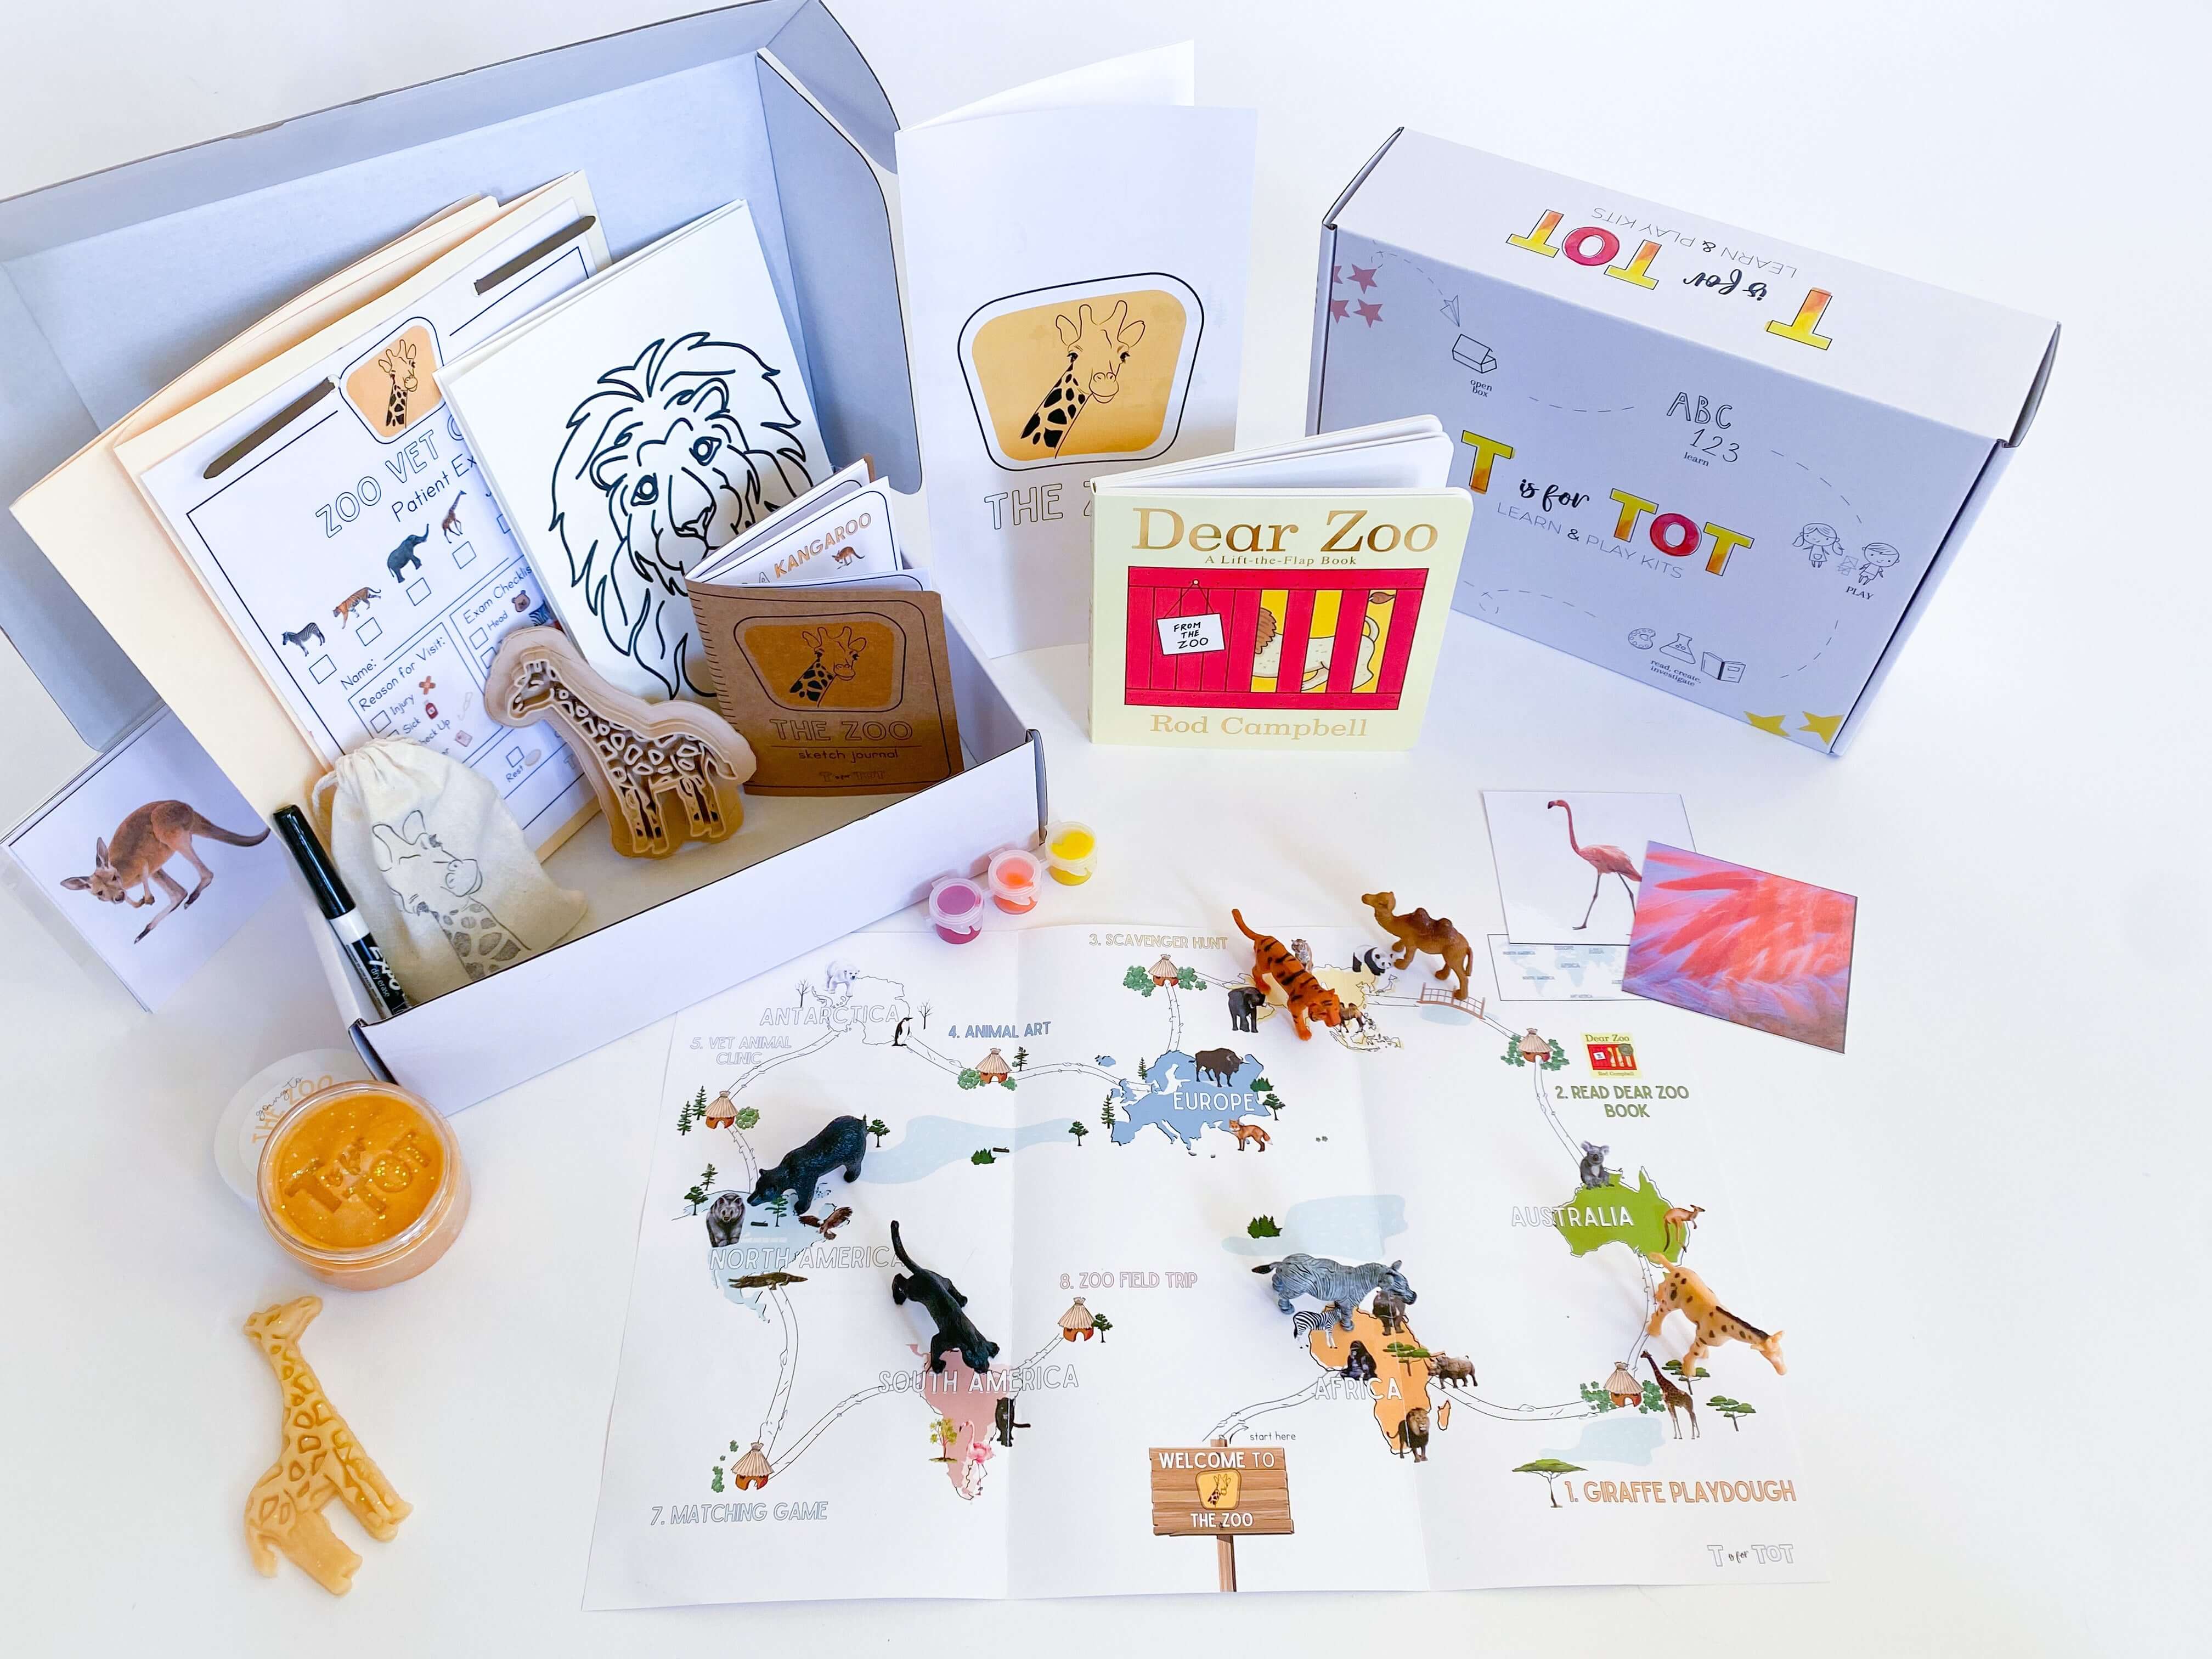 Zoo-themed play and learn kit for kids with giraffe playdough cutter, homemade playdough, zoo map, vet folder with expo marker, play animals, and 